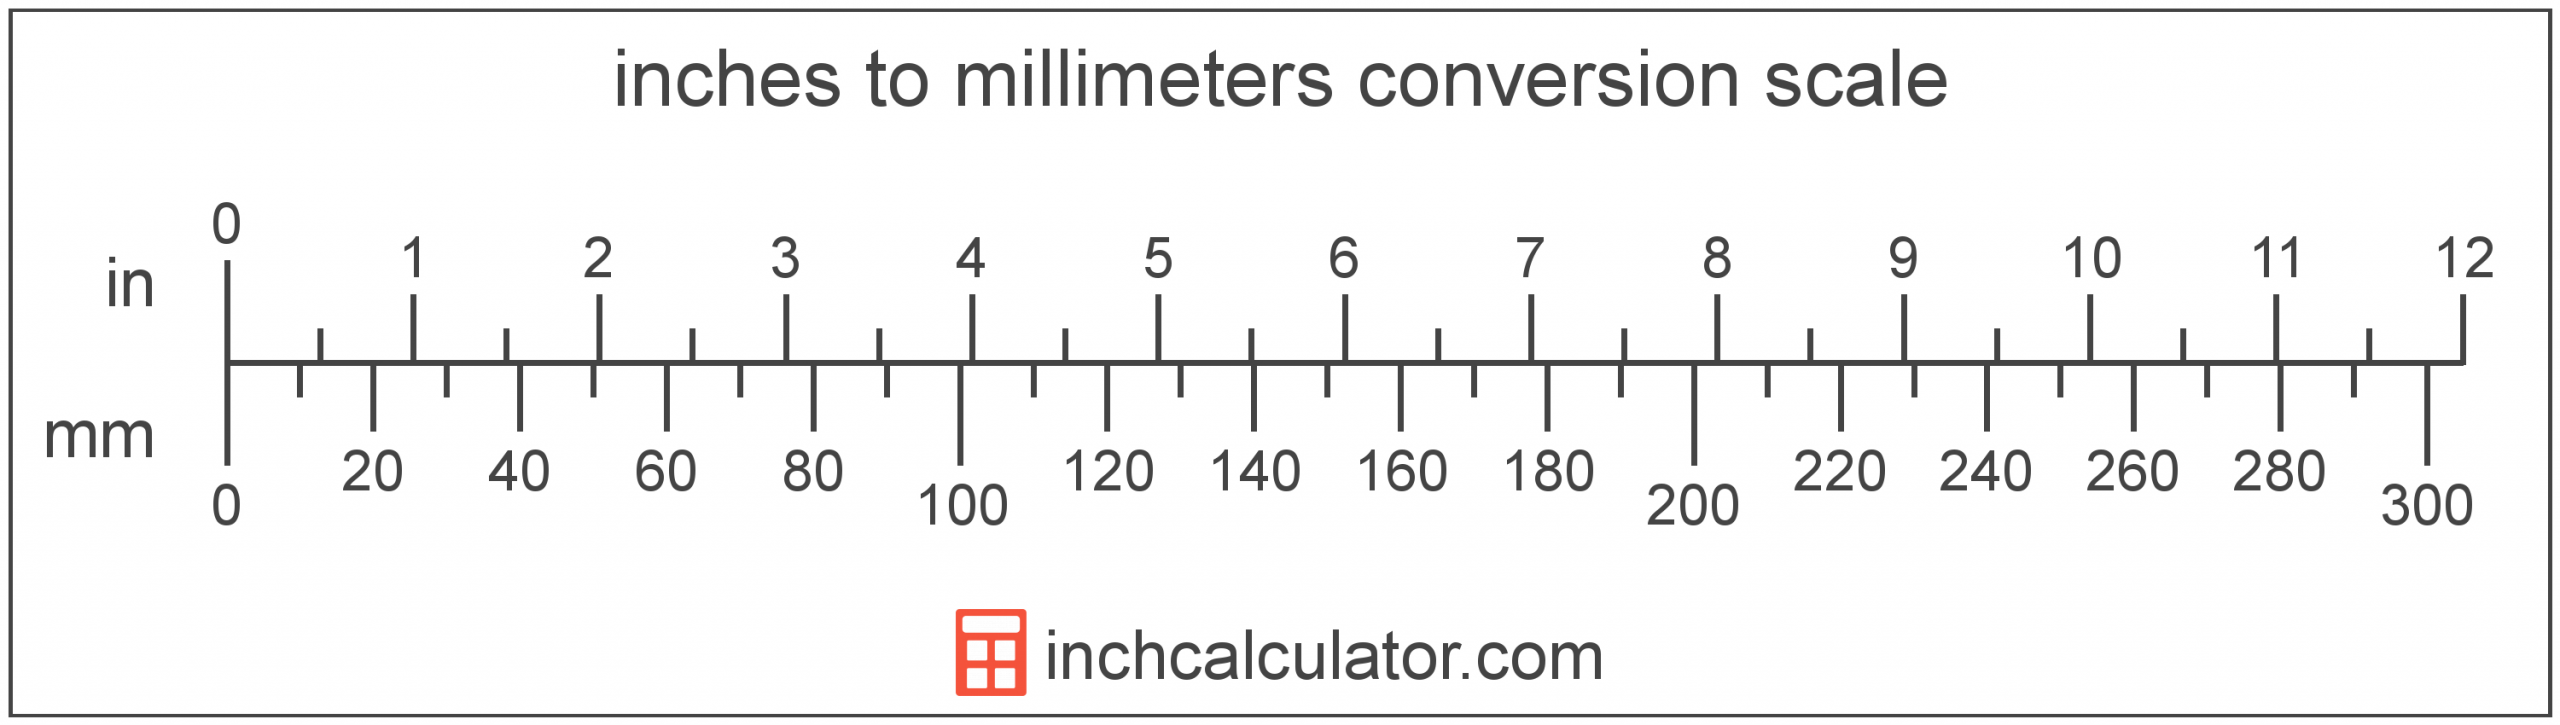 Mm To Inches Conversion (Millimeters To Inches) - Inch